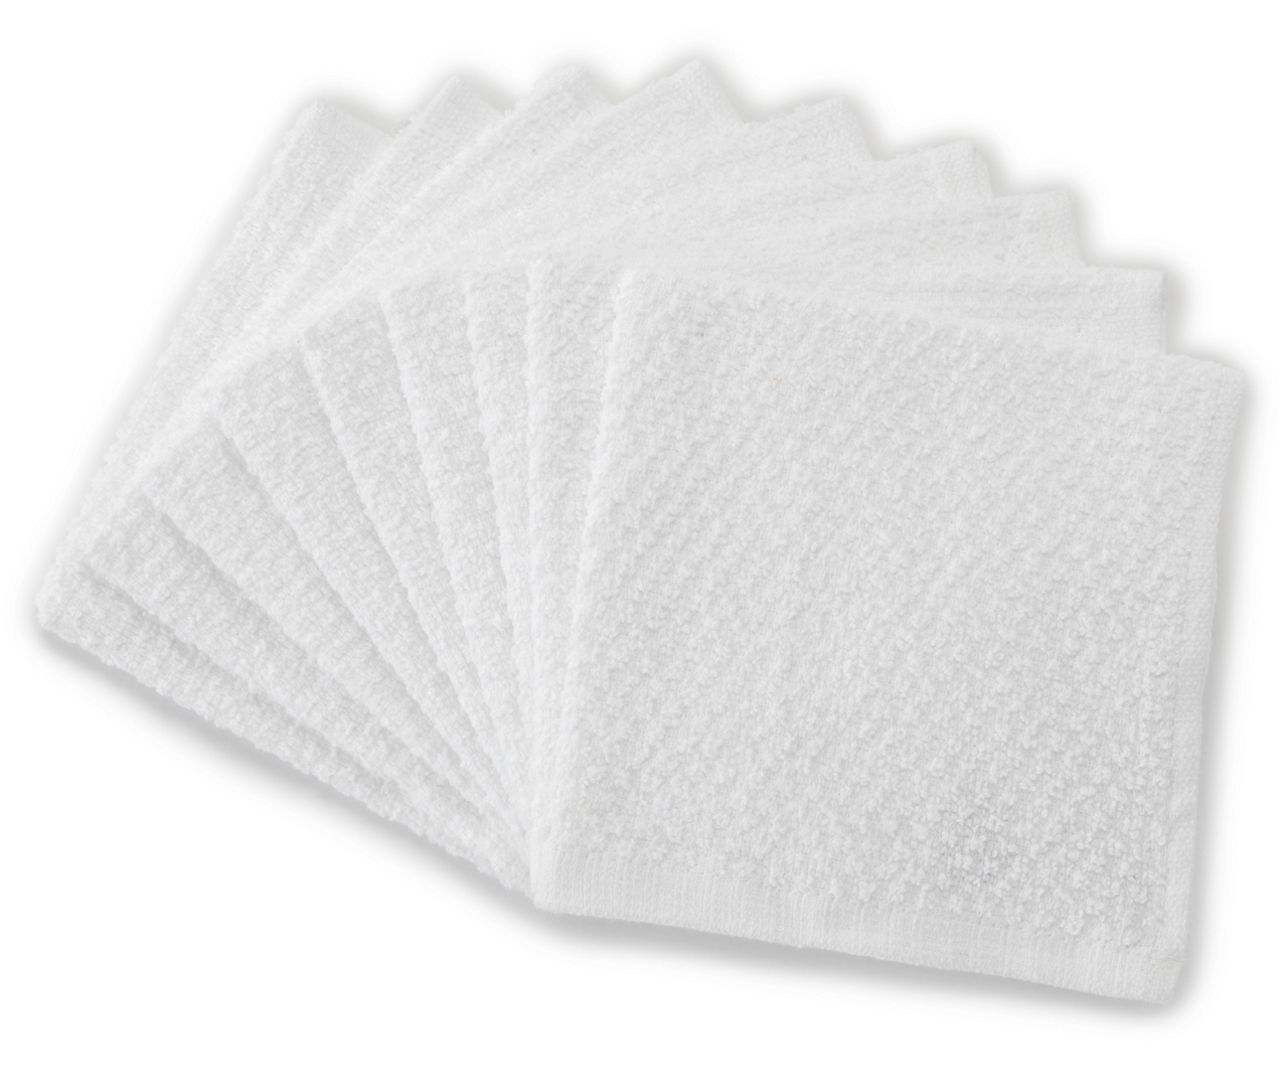 Just Home White Wash Cloths, 9-Pack